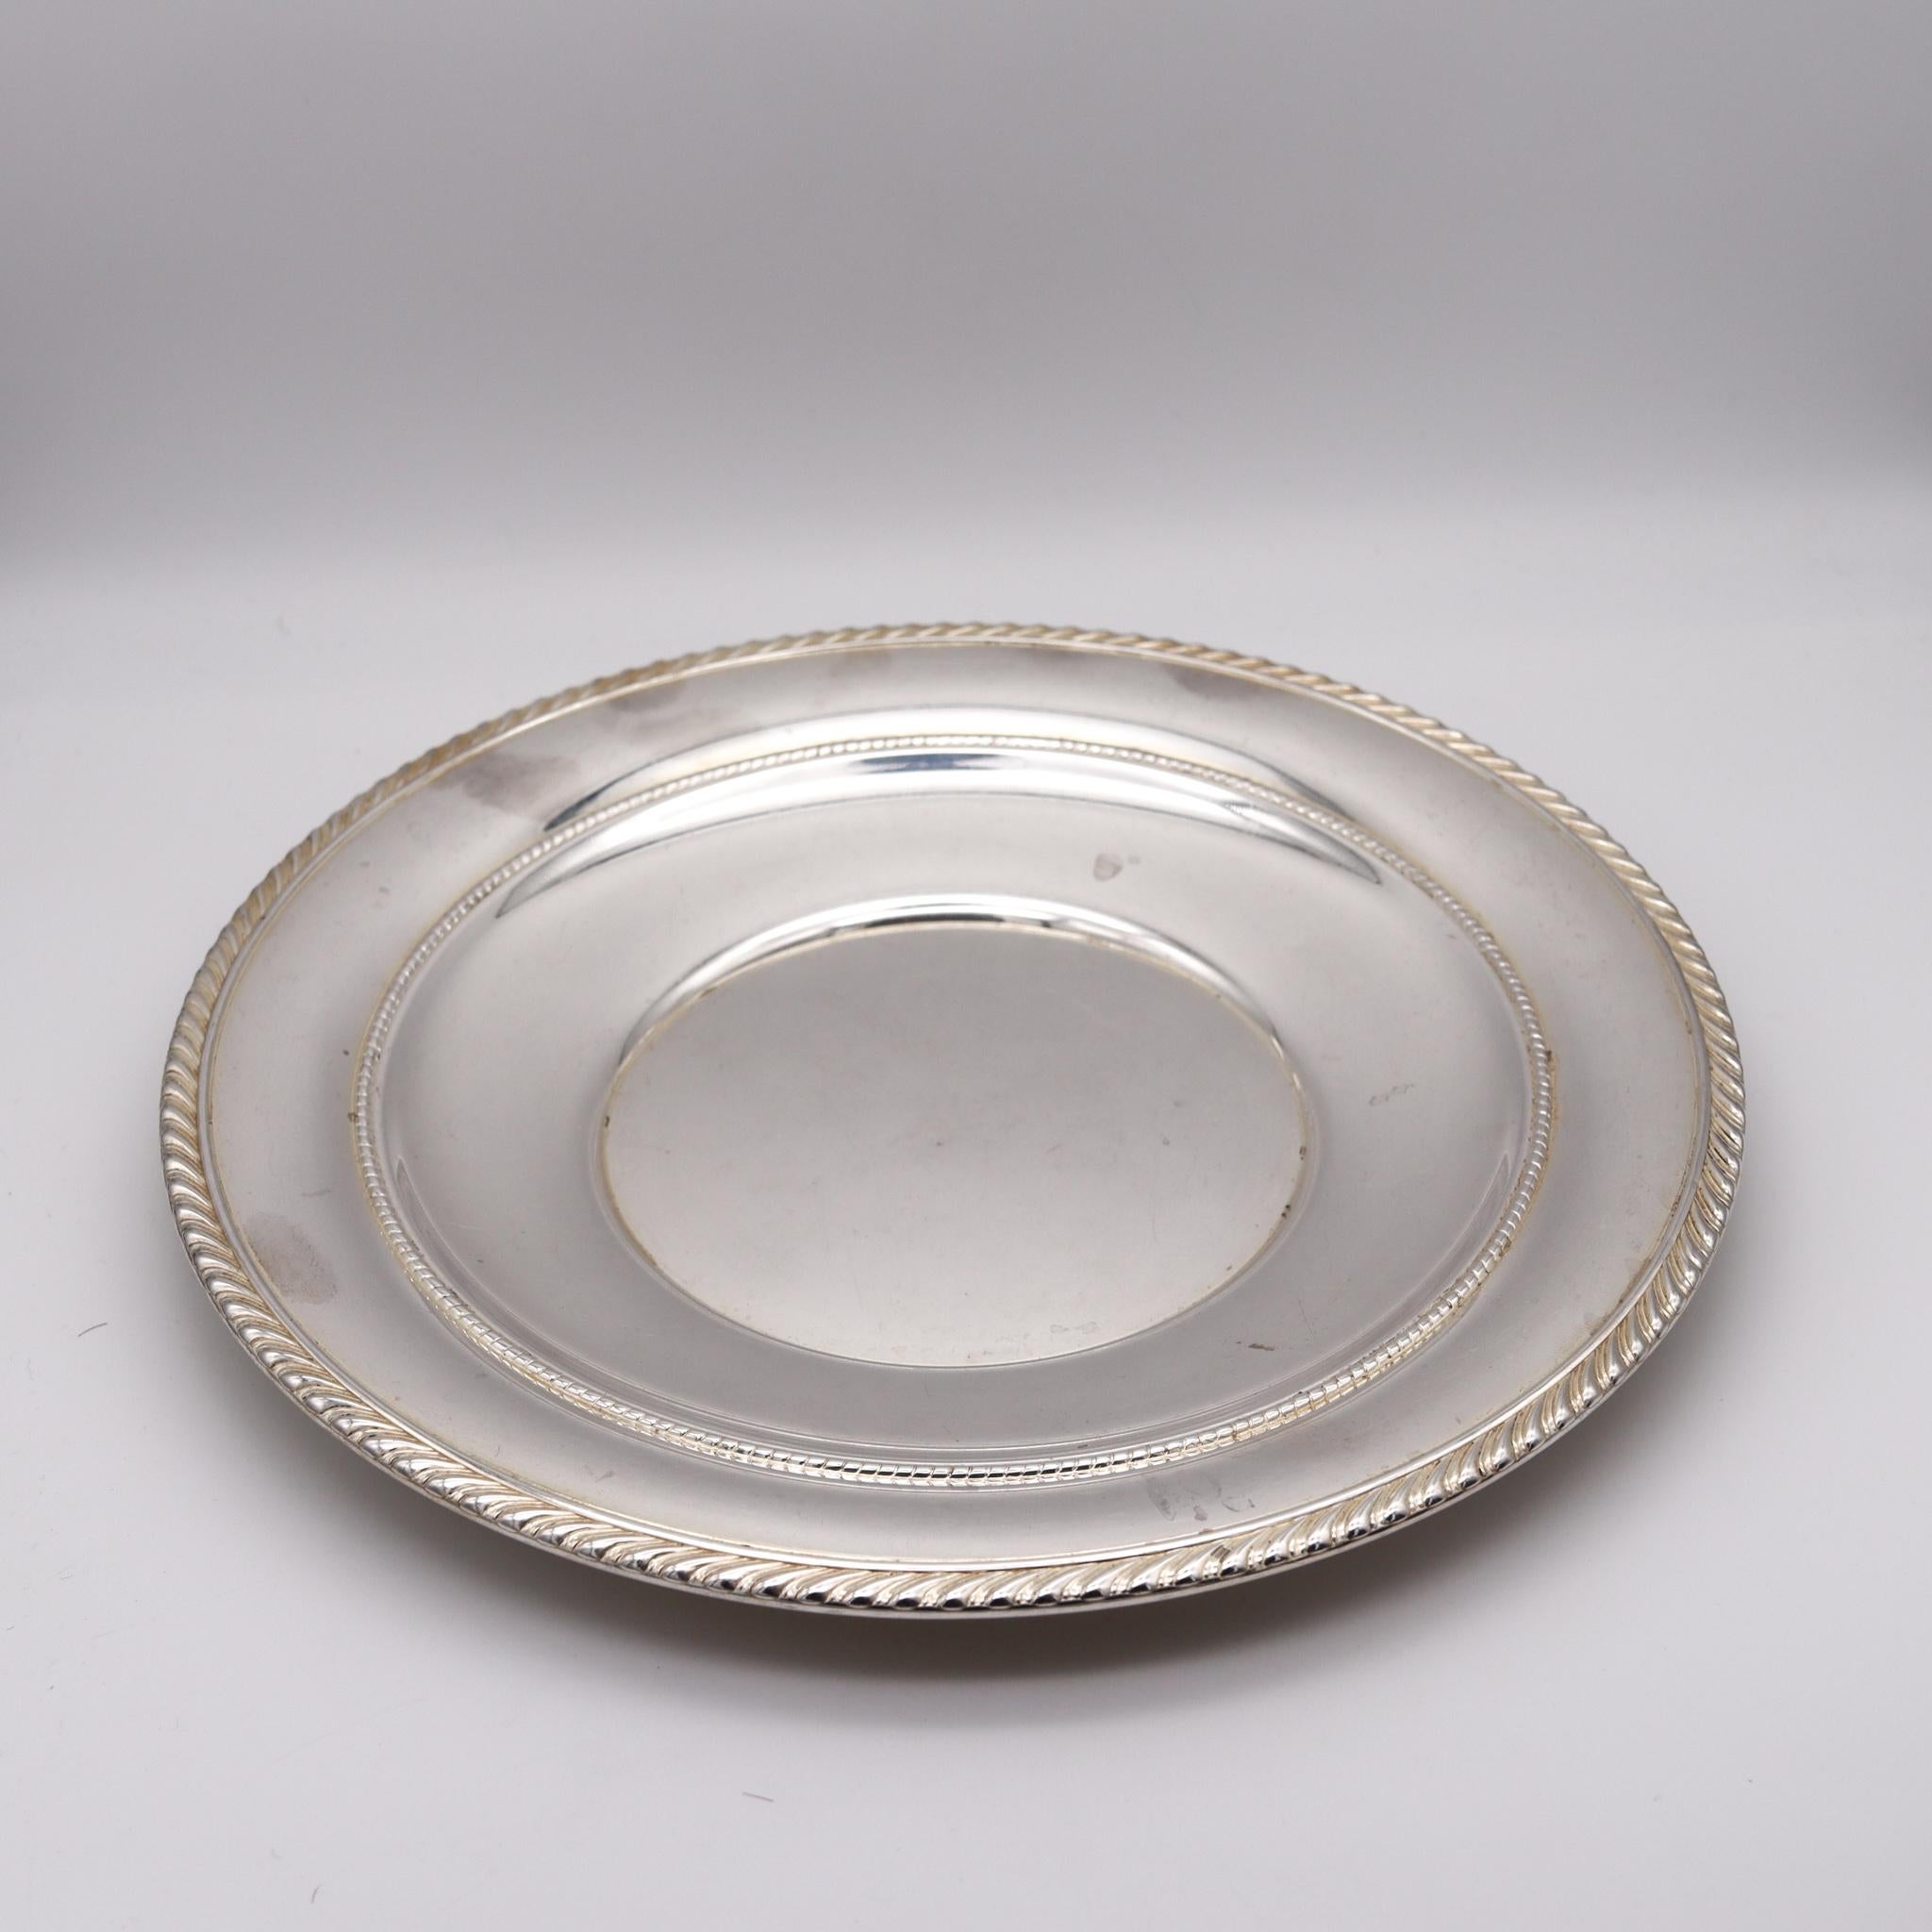 North American Gorham American 1960 Gadroon Round Tray Pattern 345 in .925 Sterling Silver For Sale